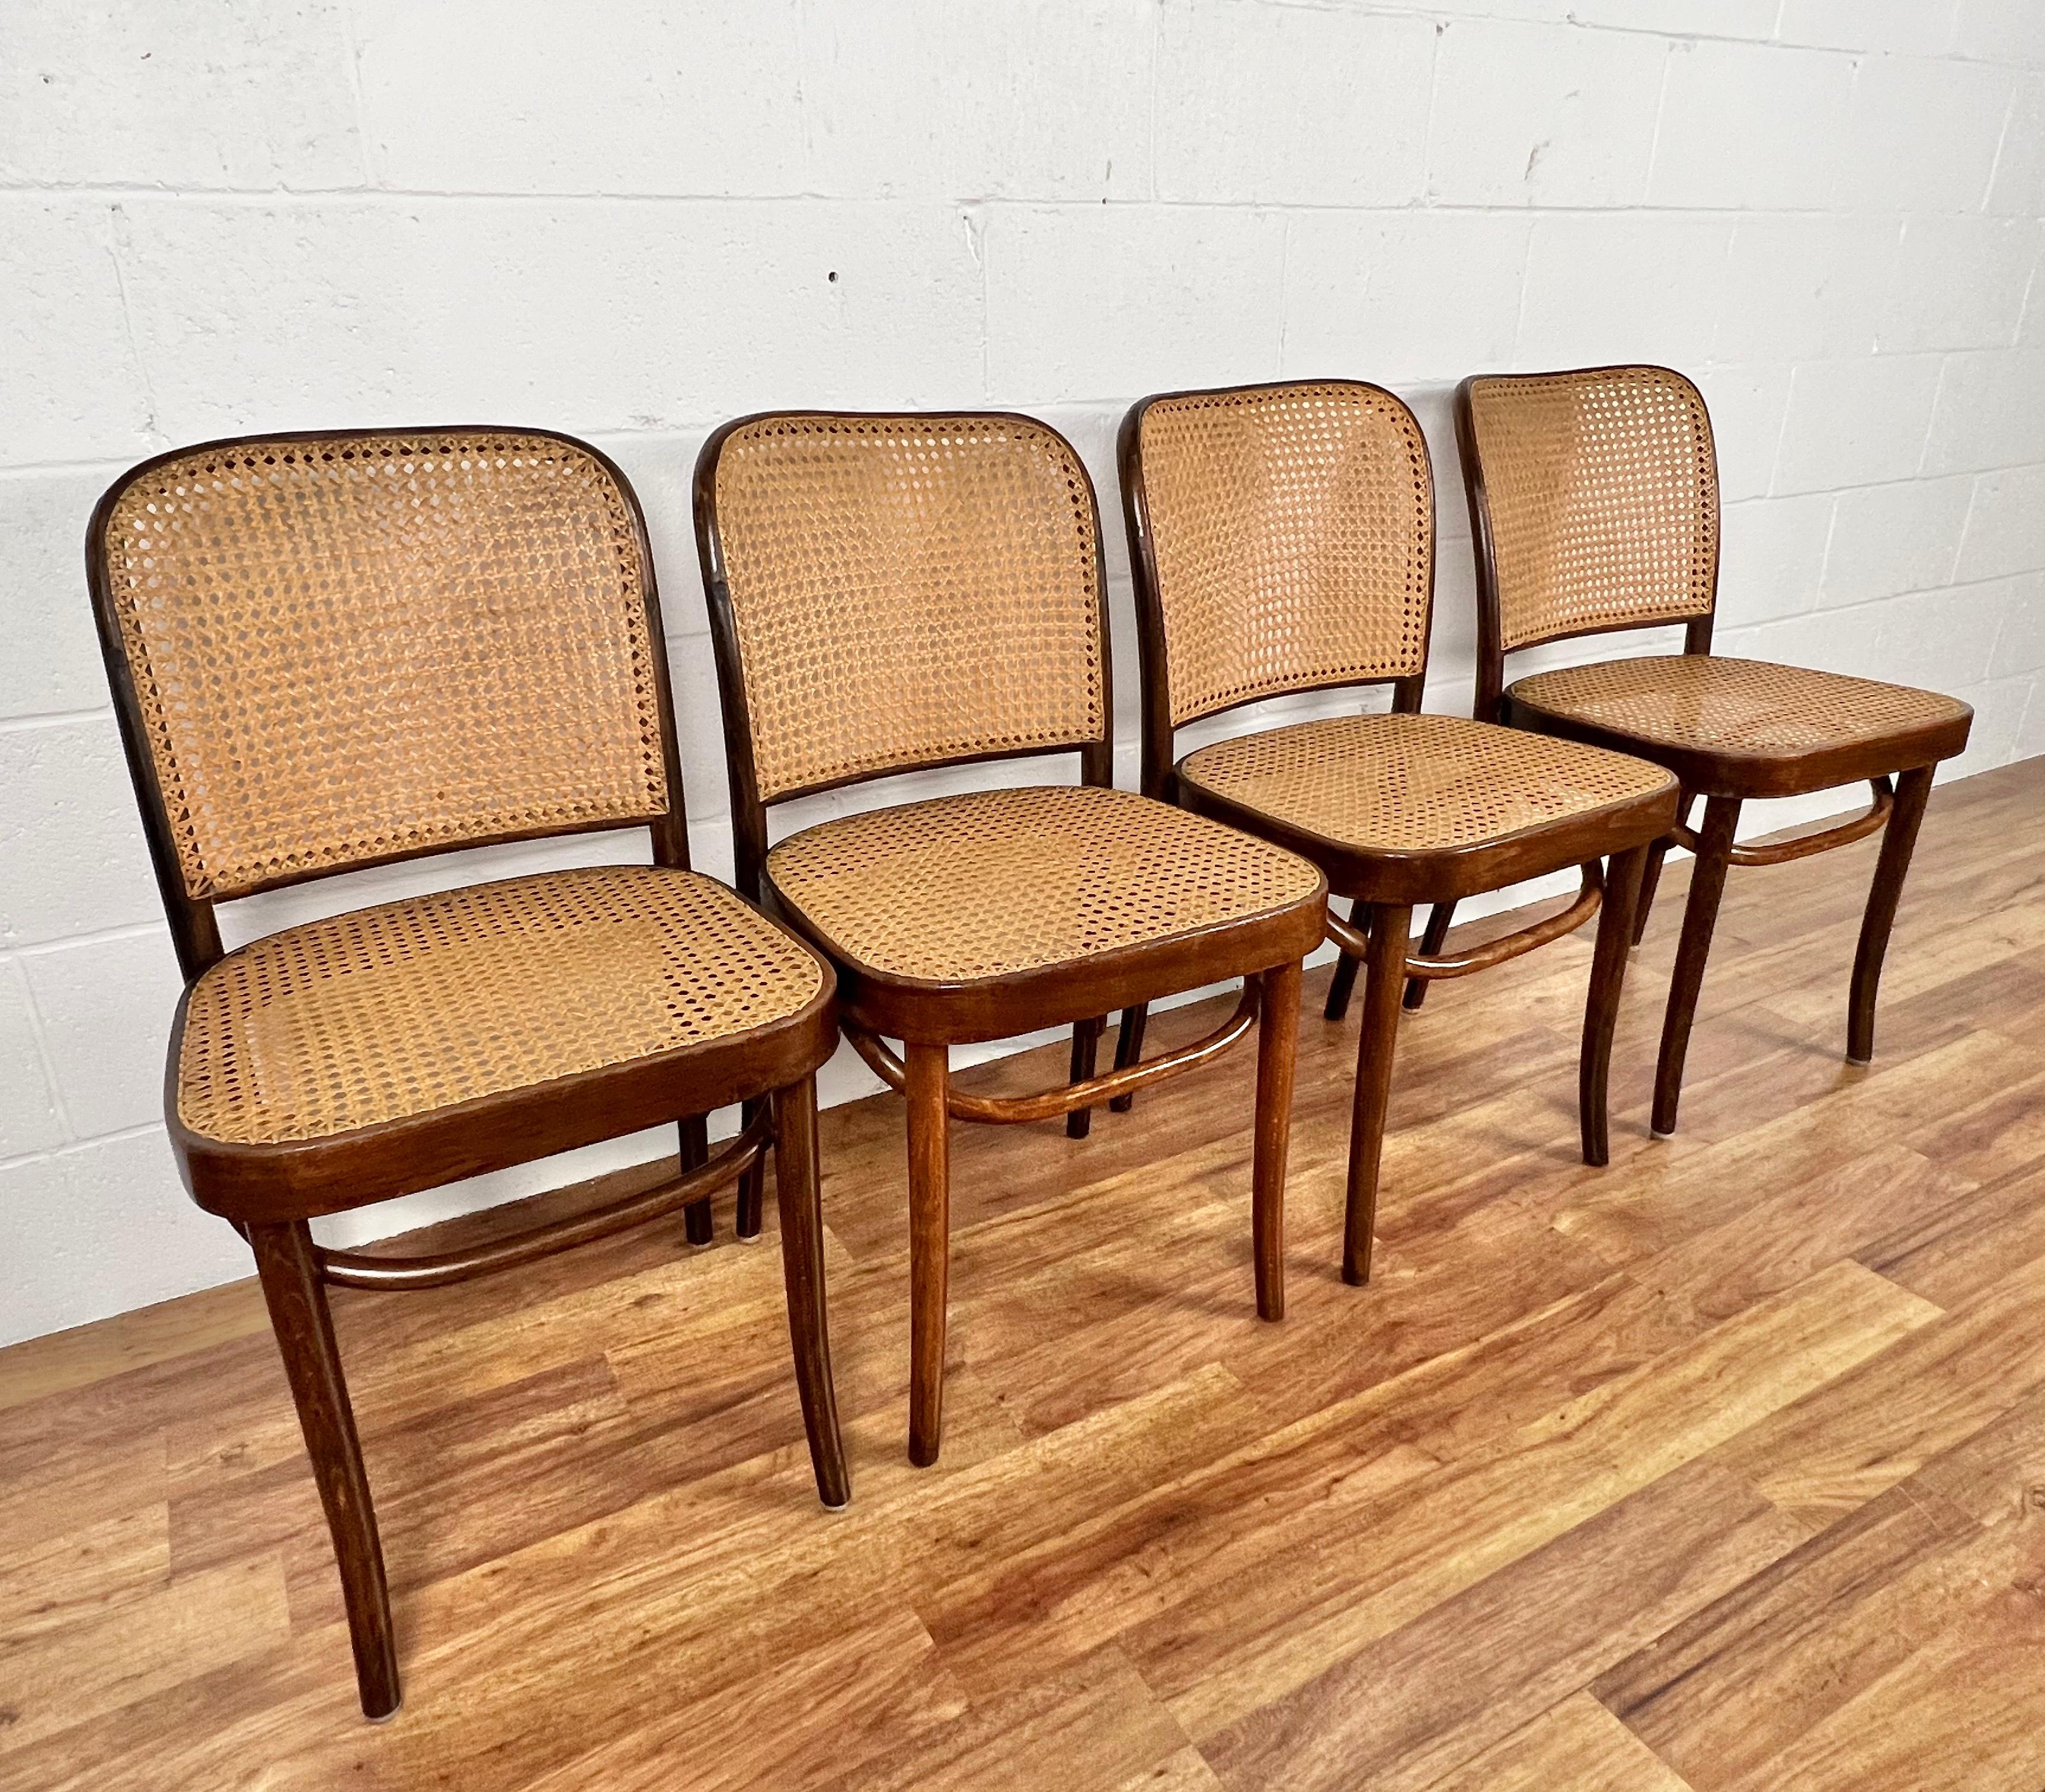 20th century Josef Hoffmann bentwood hand caned FMG Prague chairs made in Poland 2